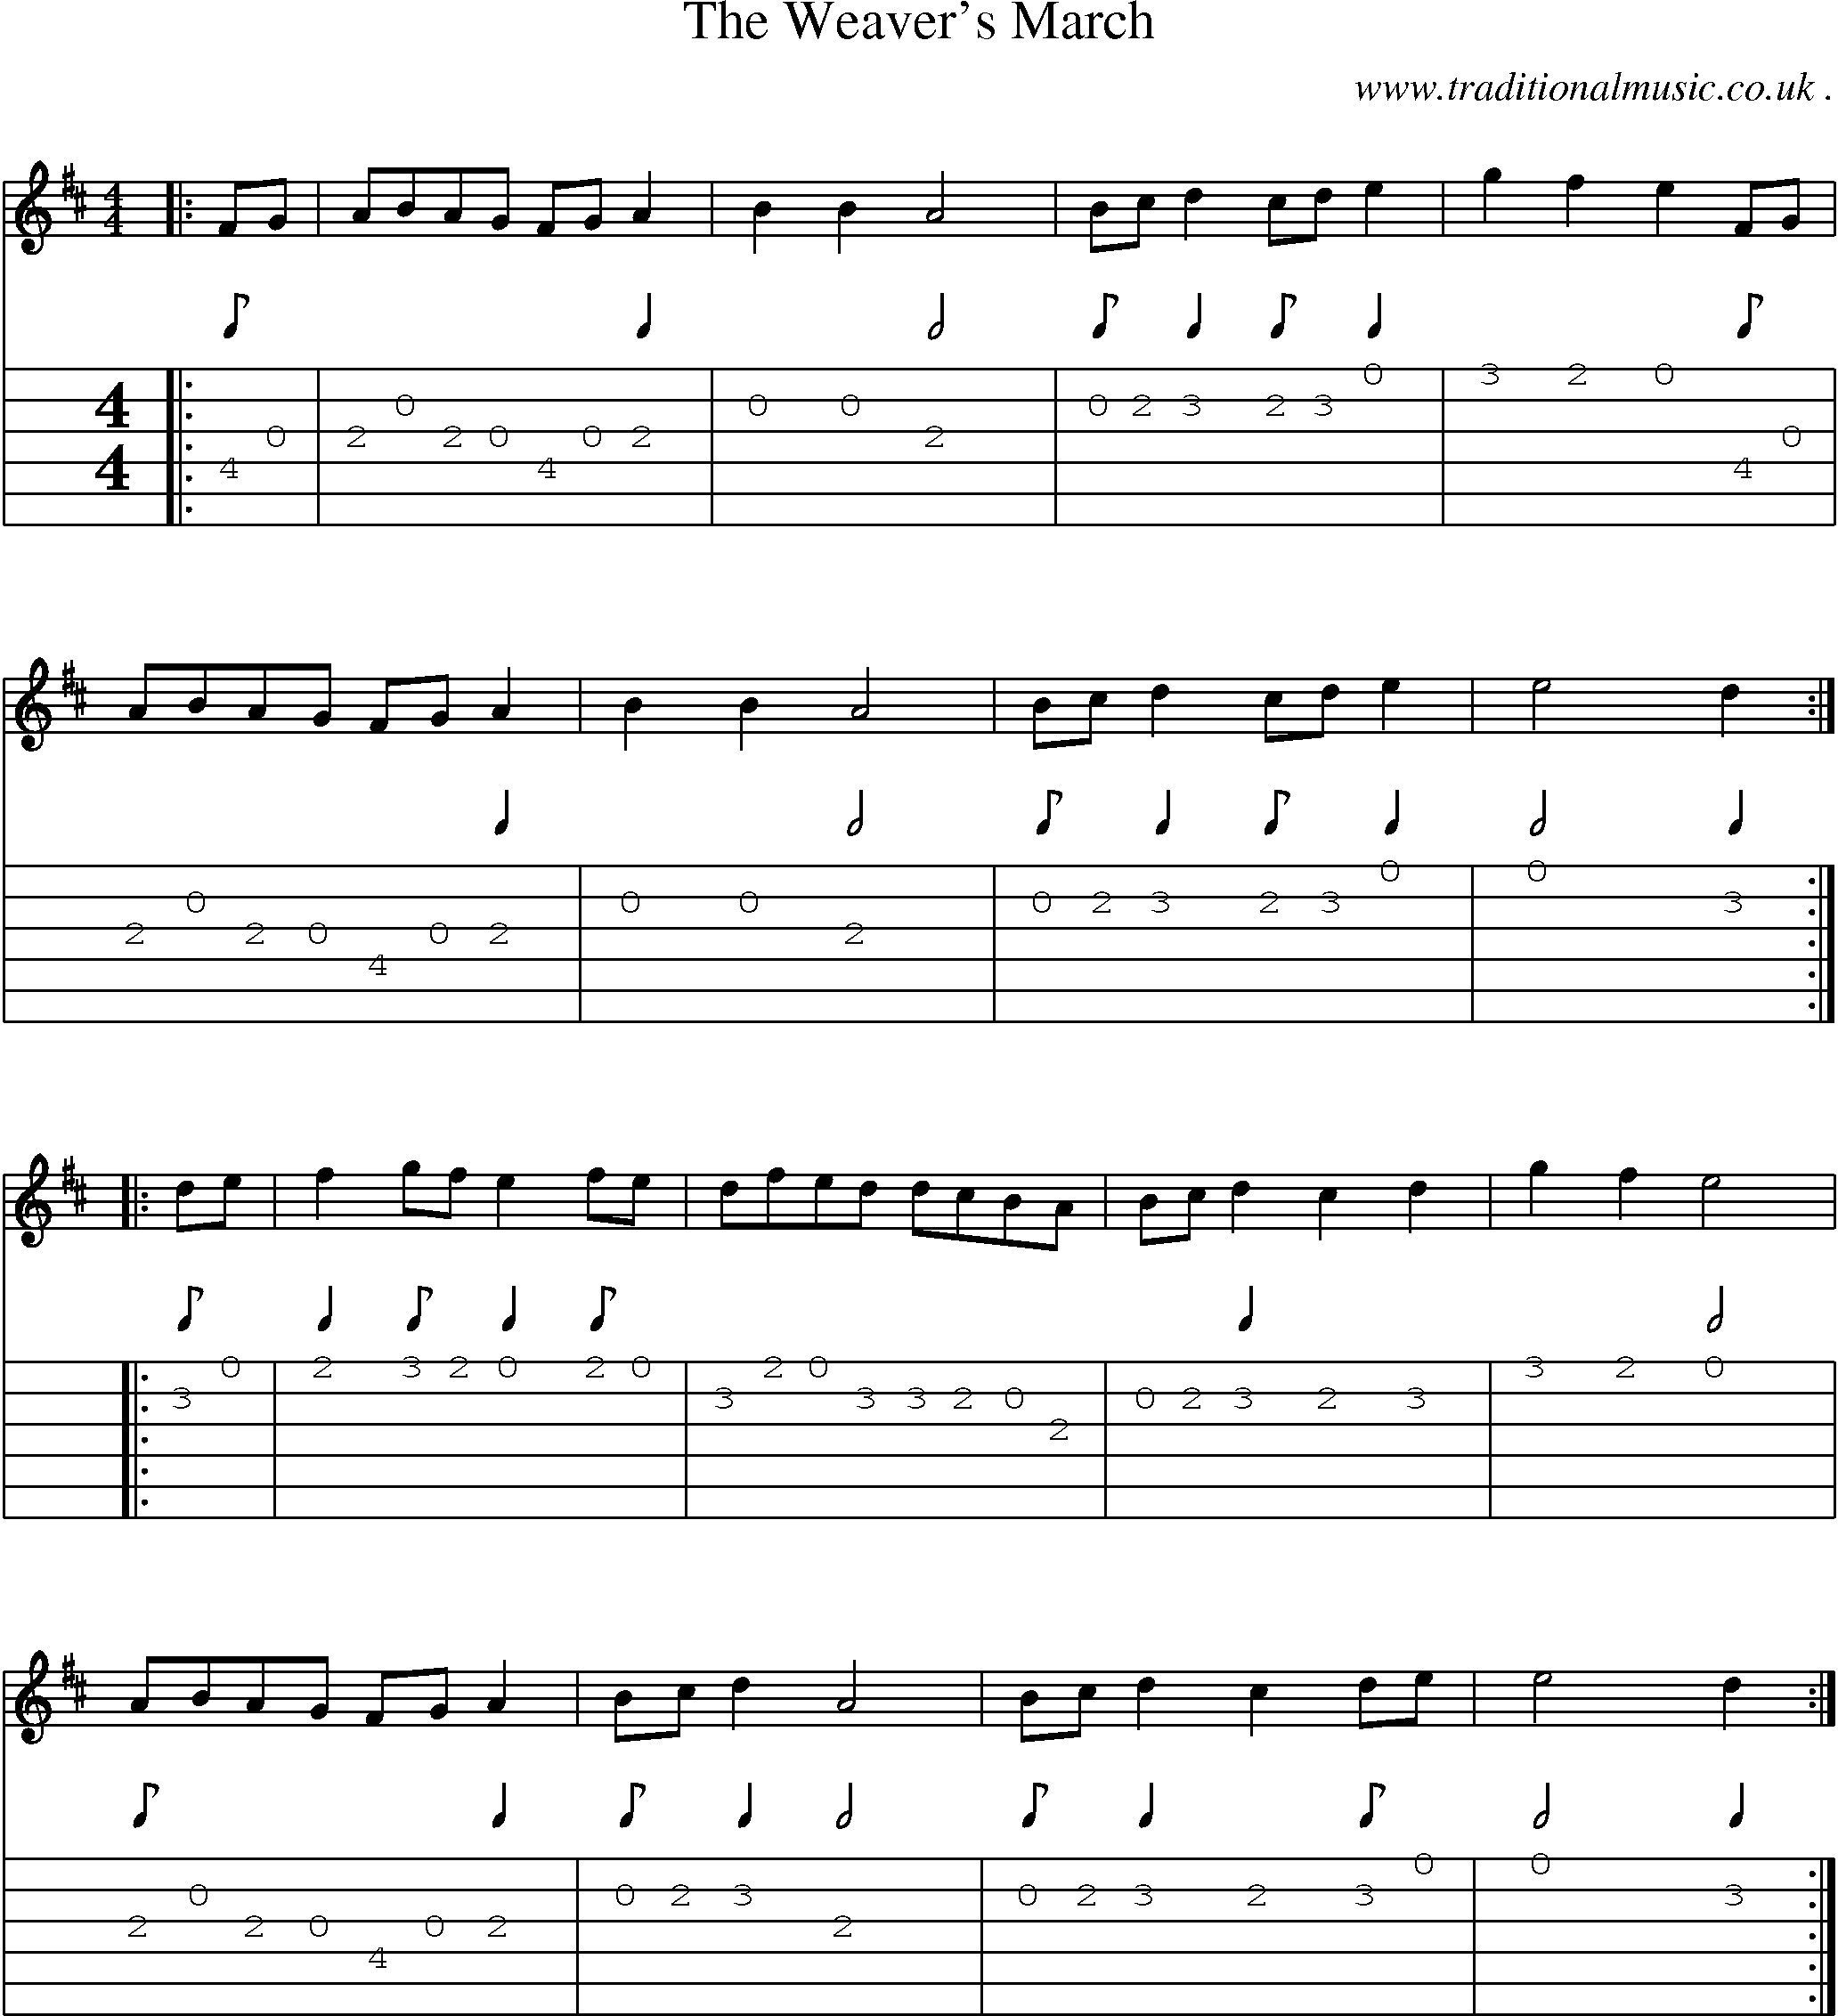 Sheet-Music and Guitar Tabs for The Weavers March